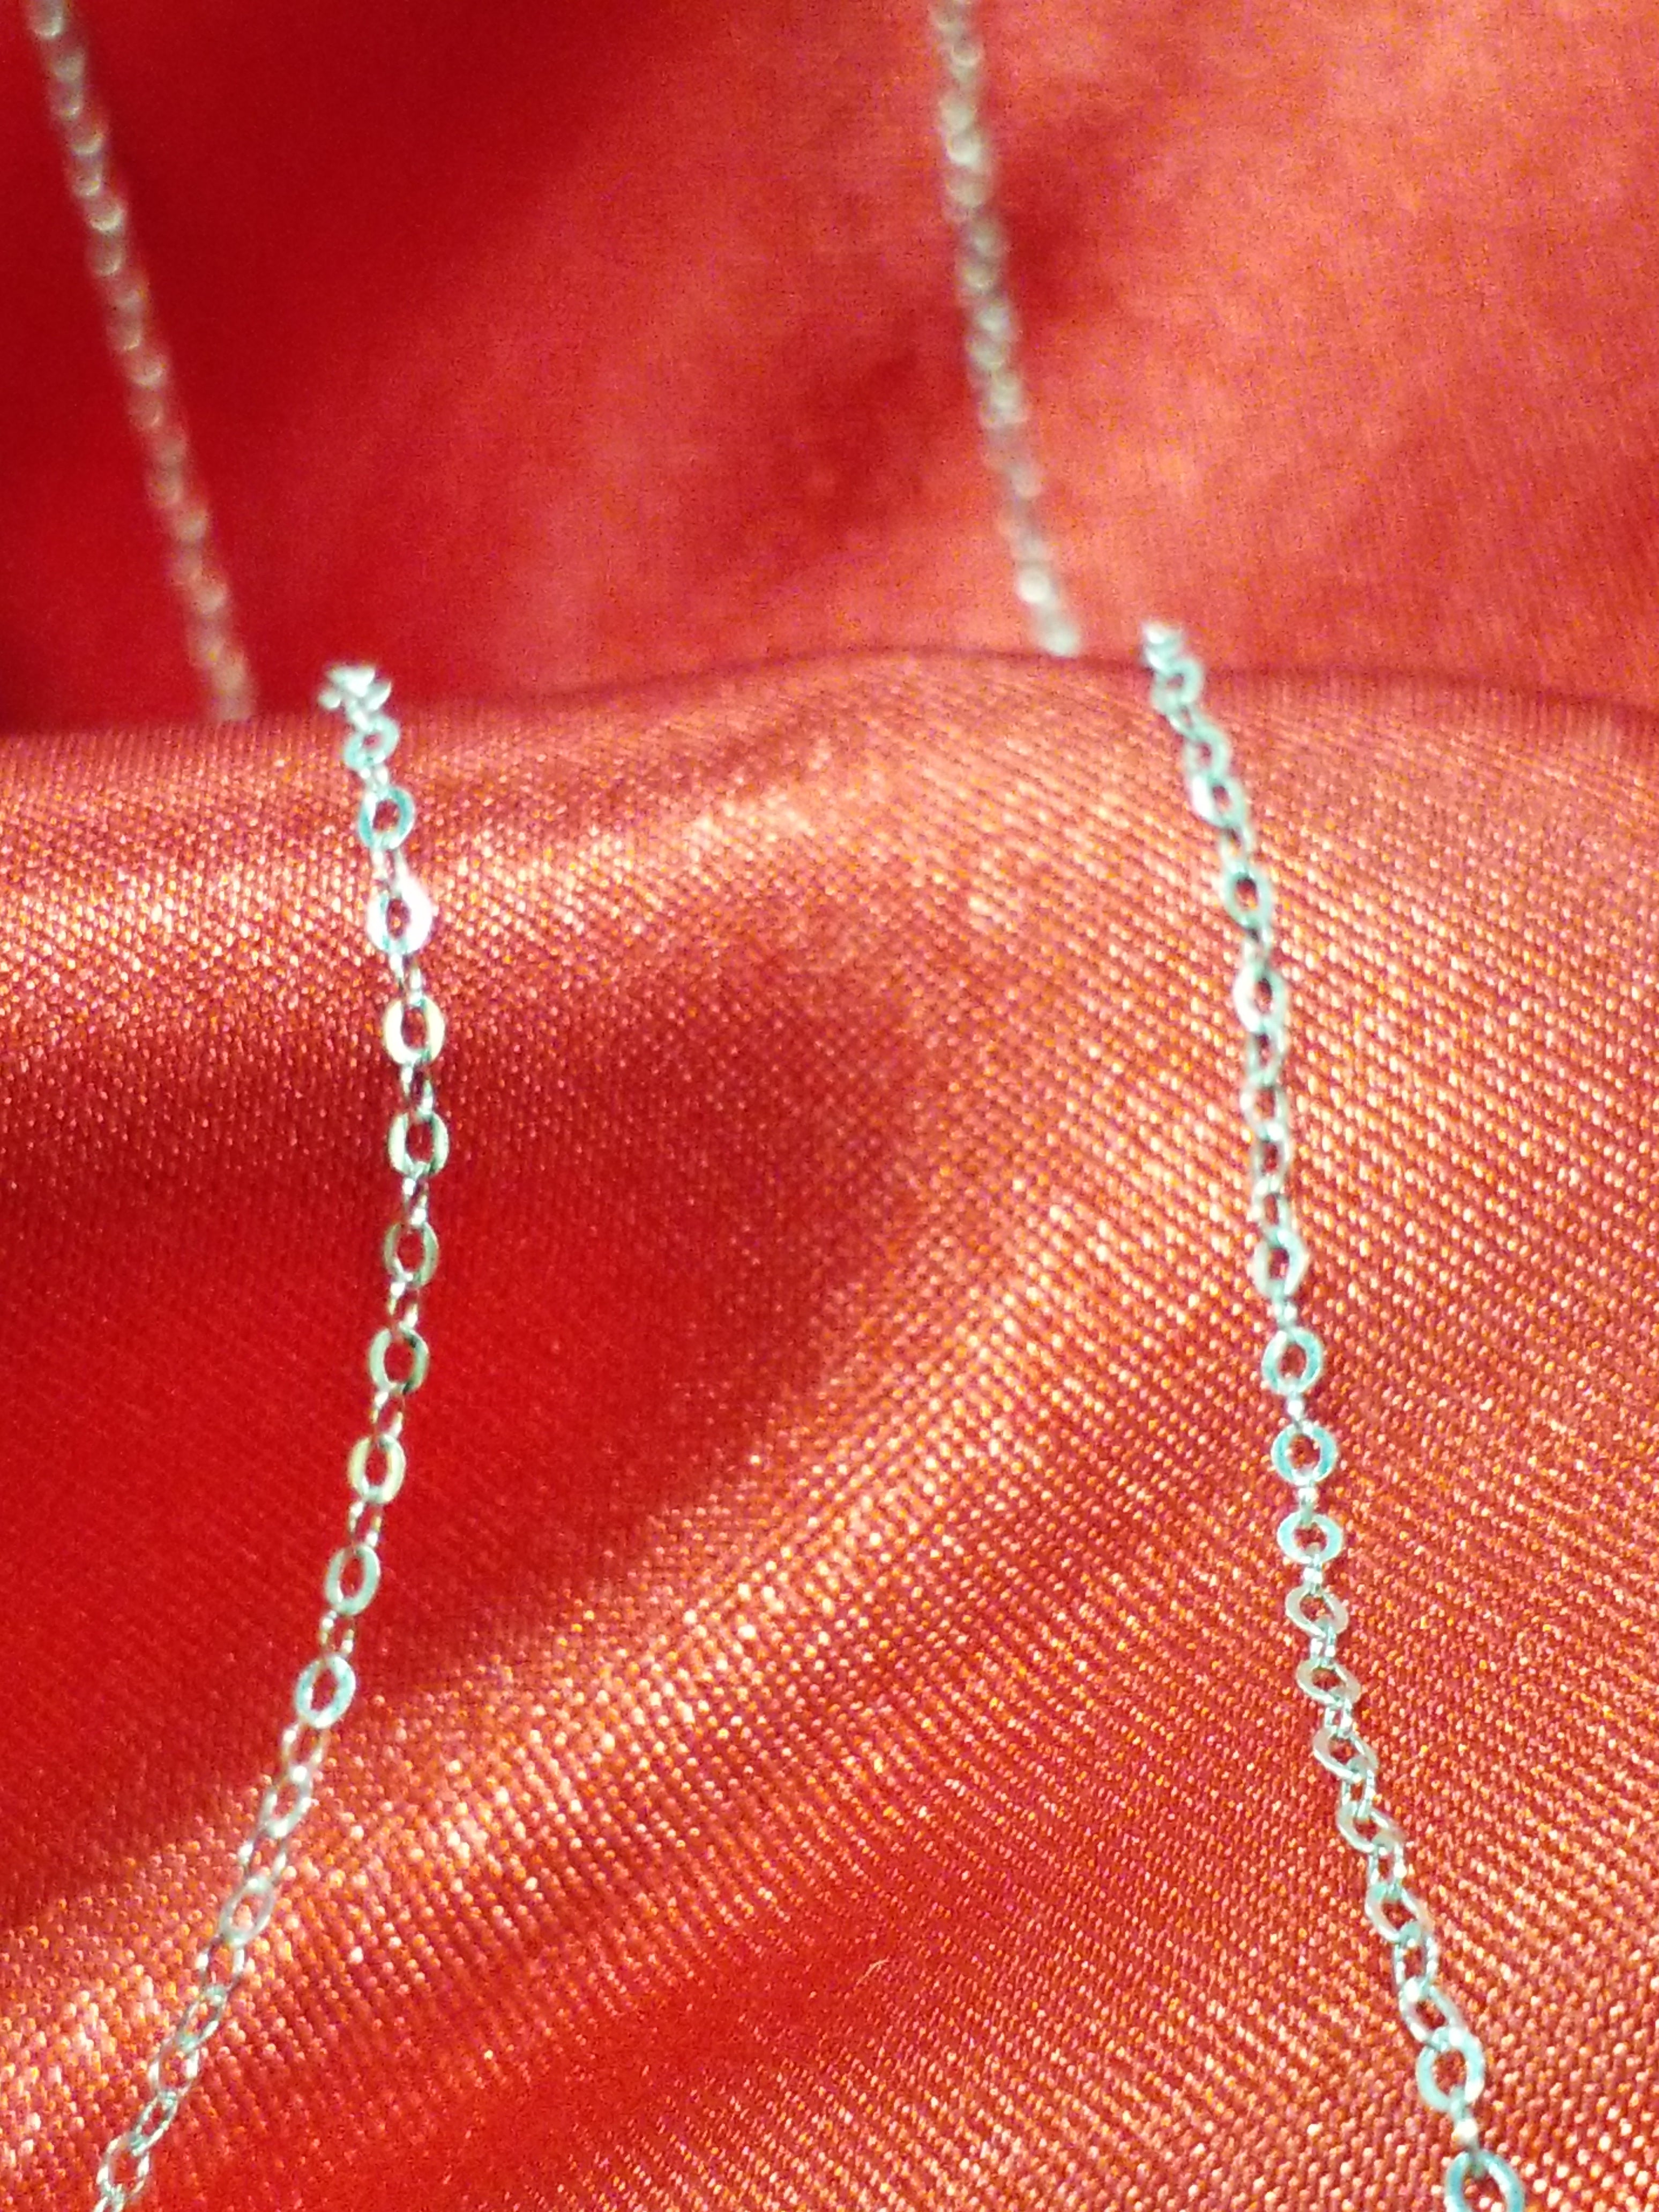 18" 10Kt White Gold Link Style Chain